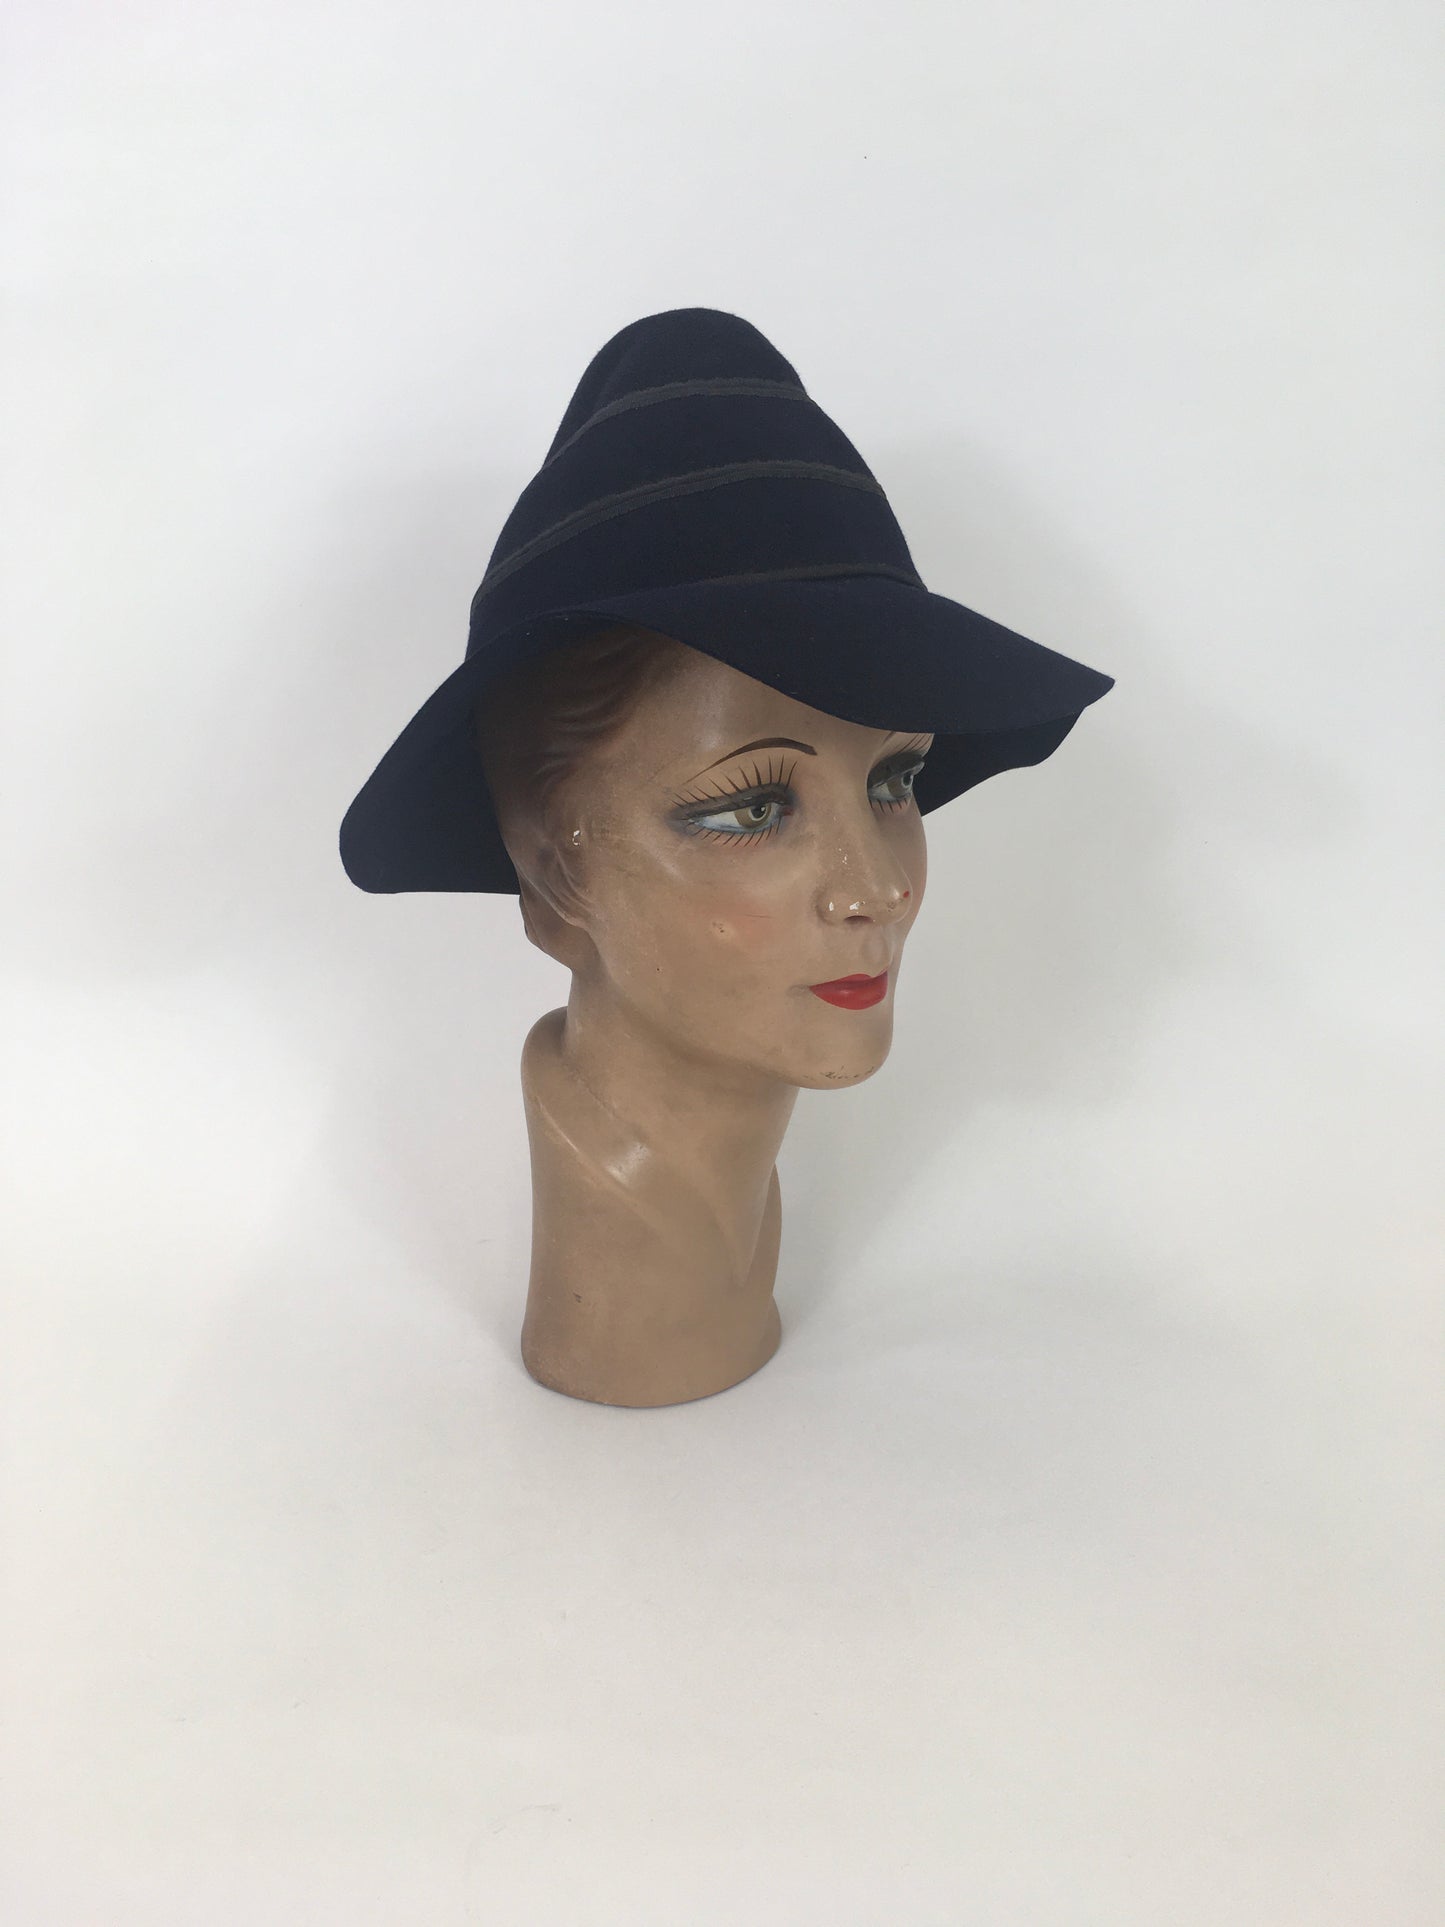 Original 1930’s / 1940’s Fedora Hat with Bow Detailing - In A Deep Navy